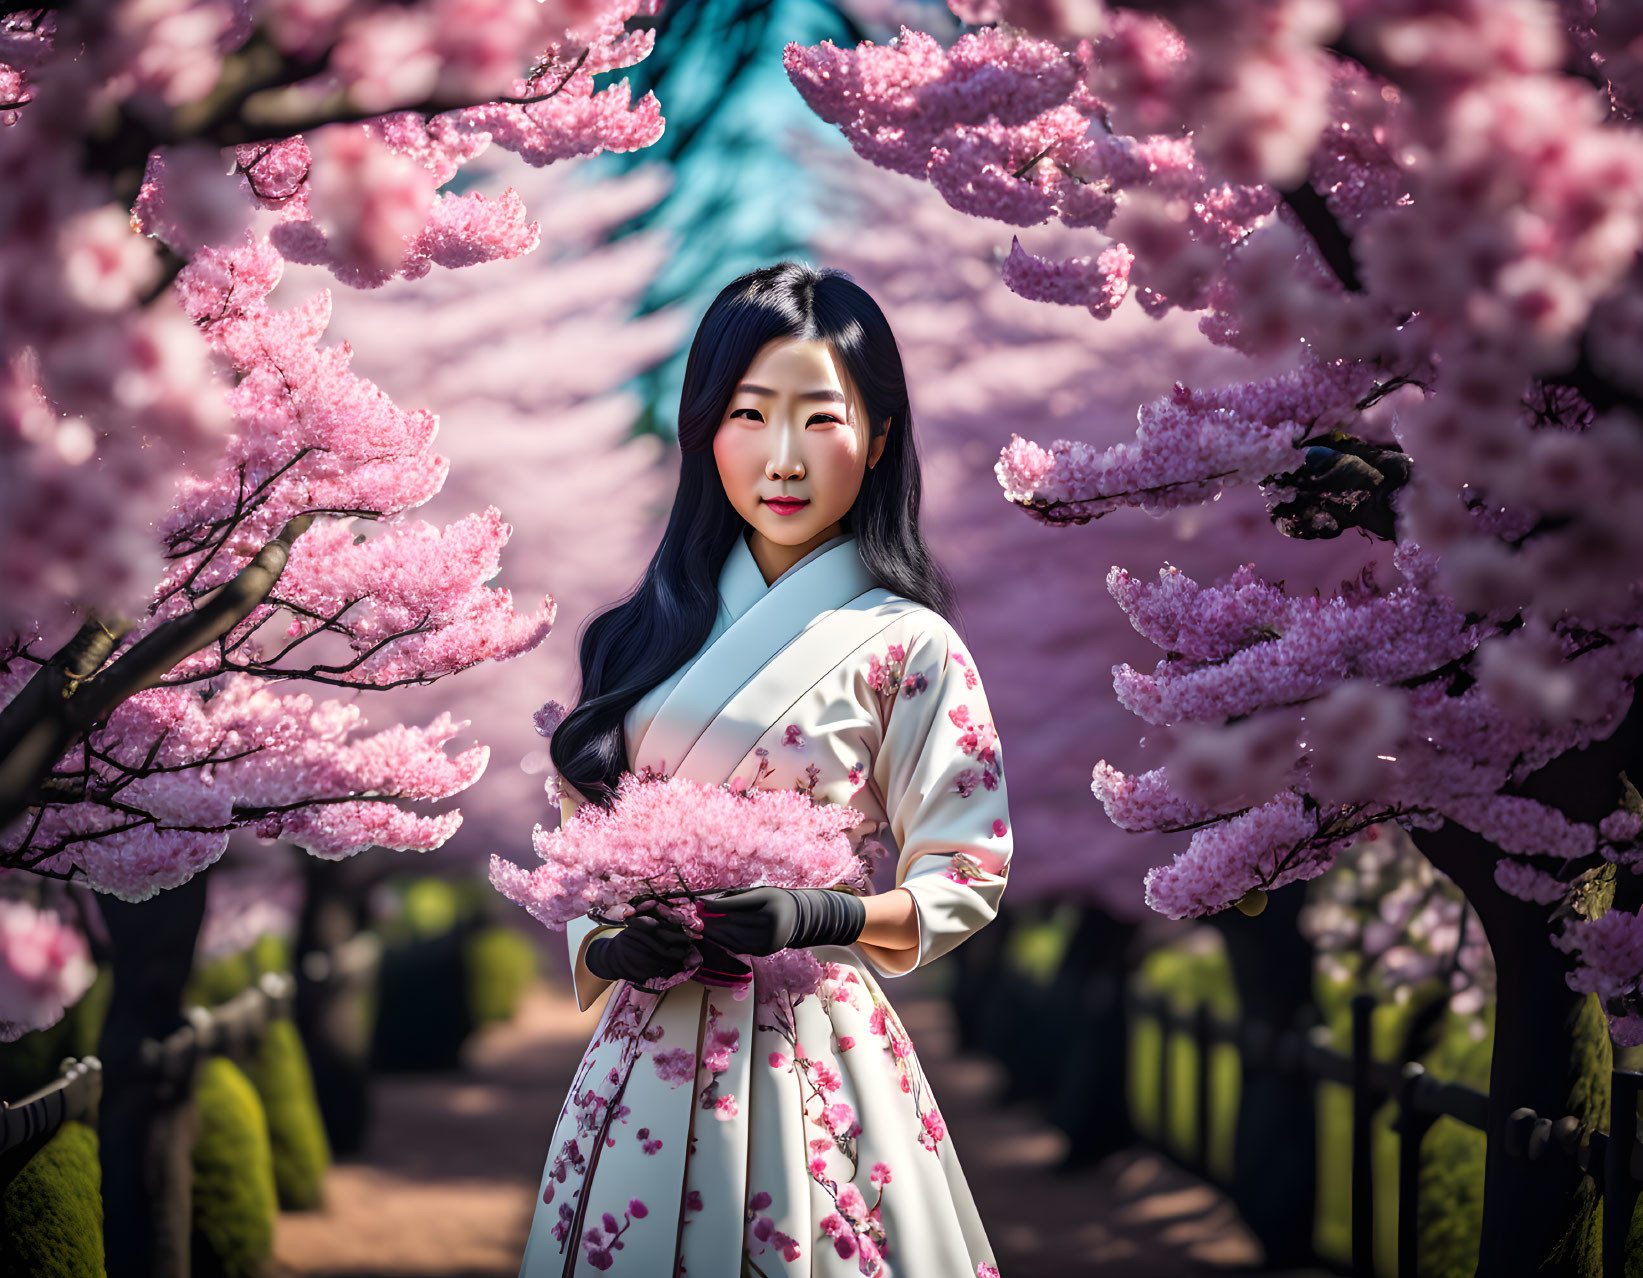 Woman in Floral Kimono Among Pink Cherry Blossoms Holding Branch